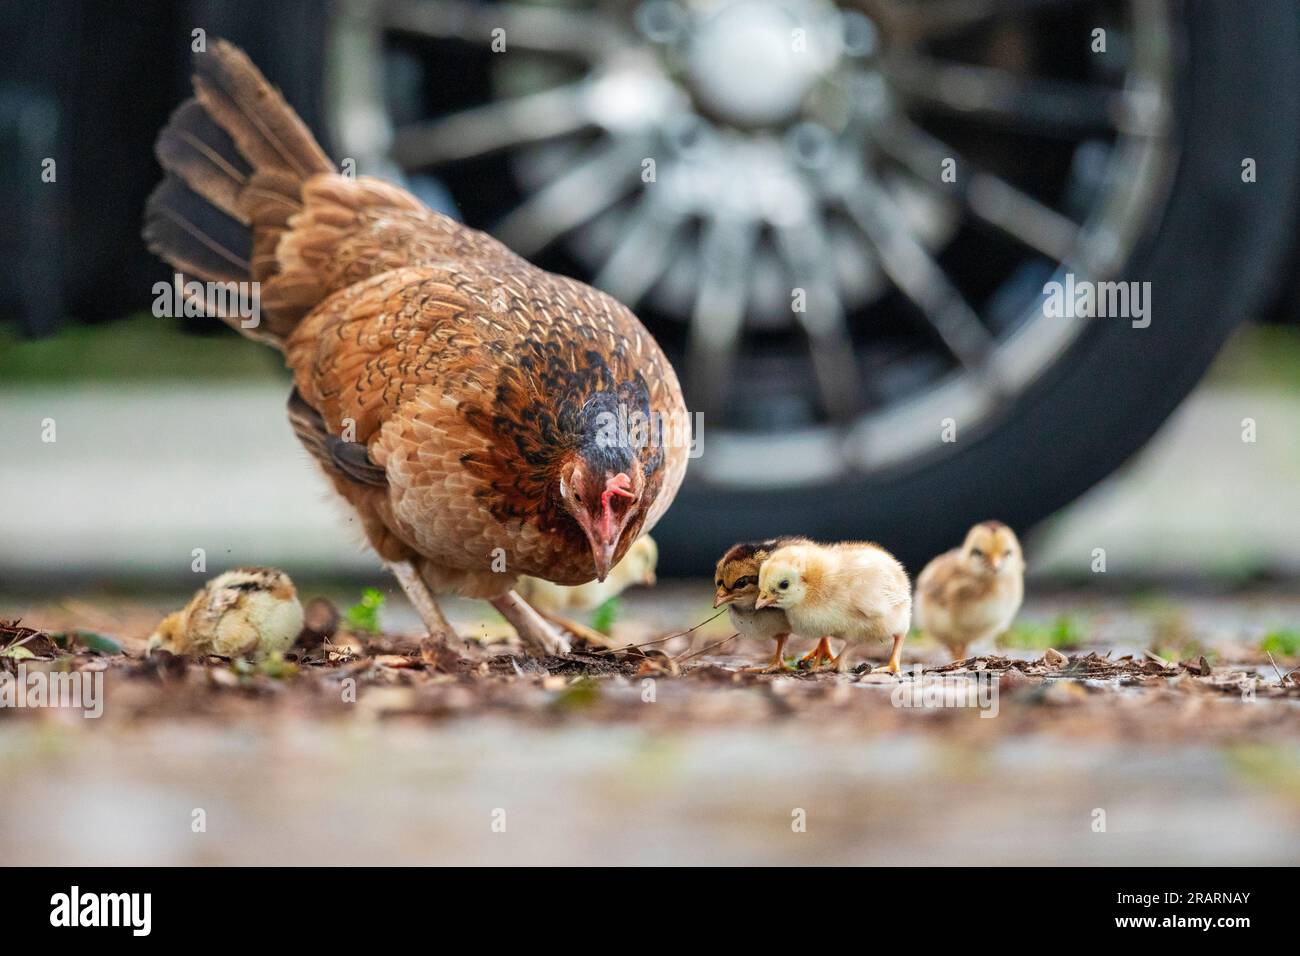 A wild chicken hen helps her clutch of chicks to forage in a car park, Singapore Stock Photo